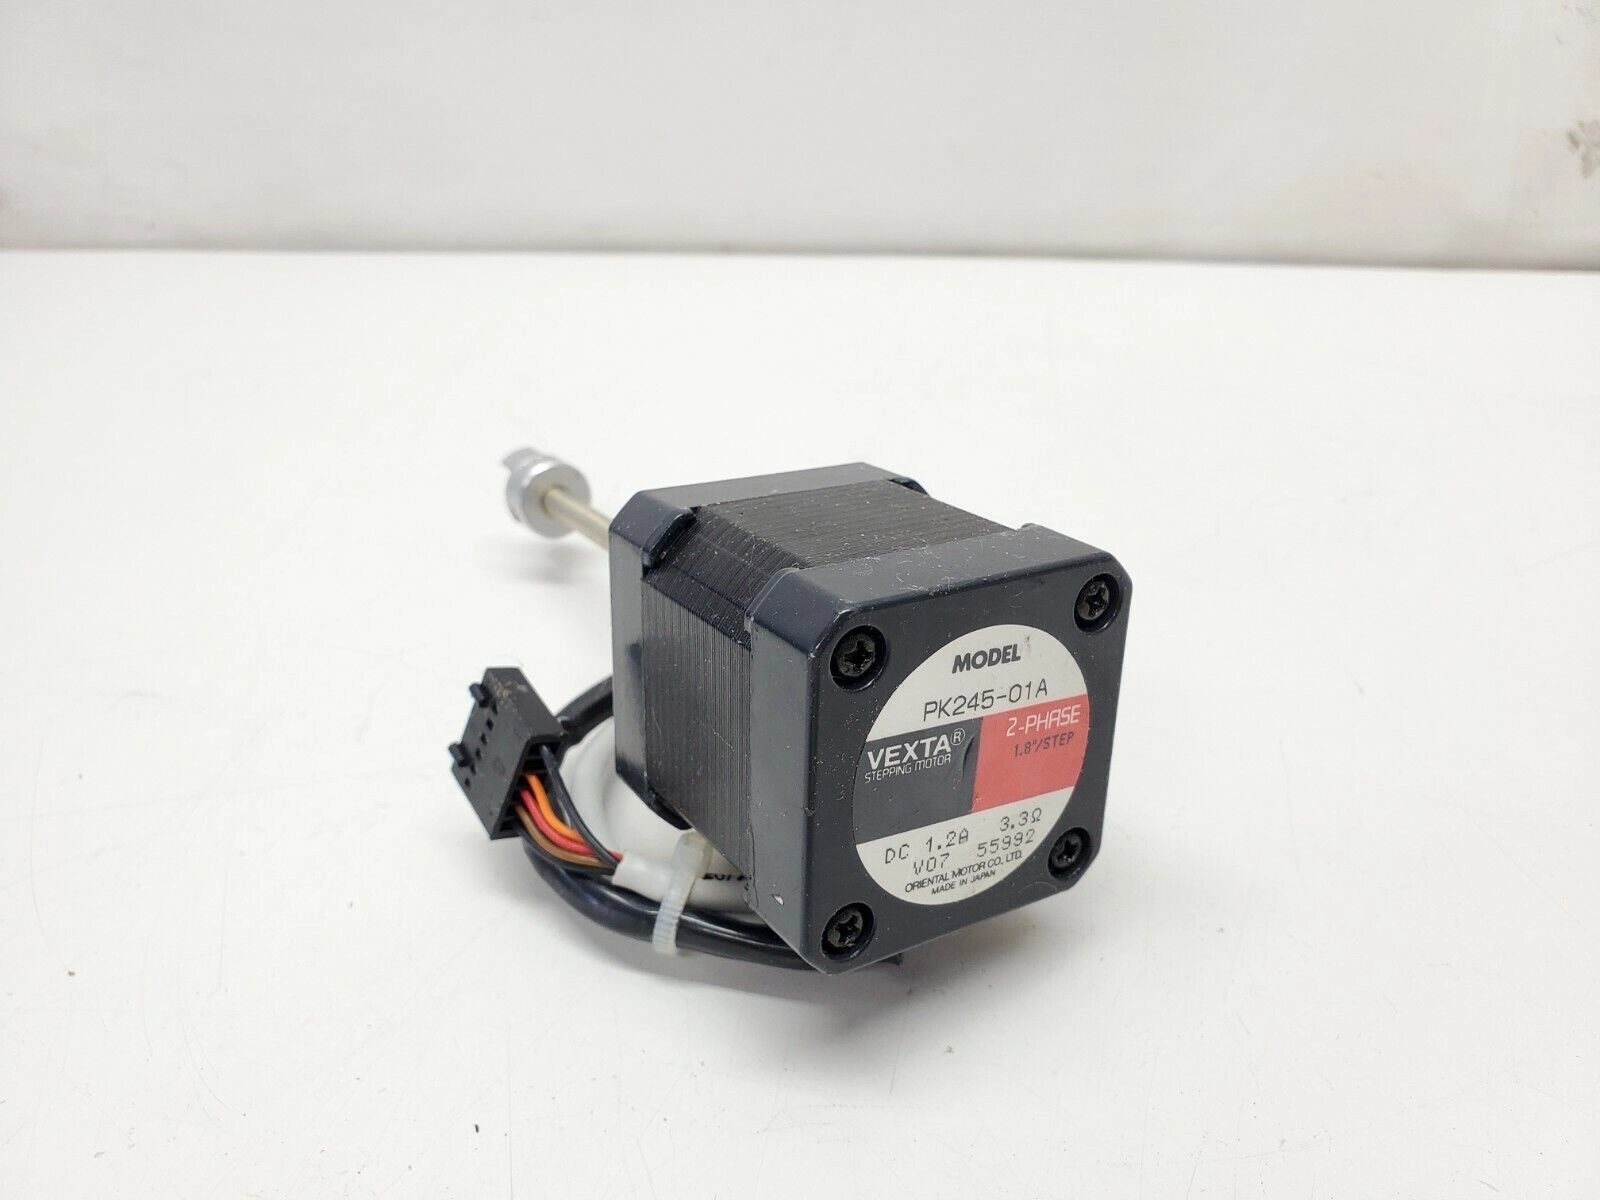 Vexta PK245-01A Stepping Motor 2-Phase 1.2A